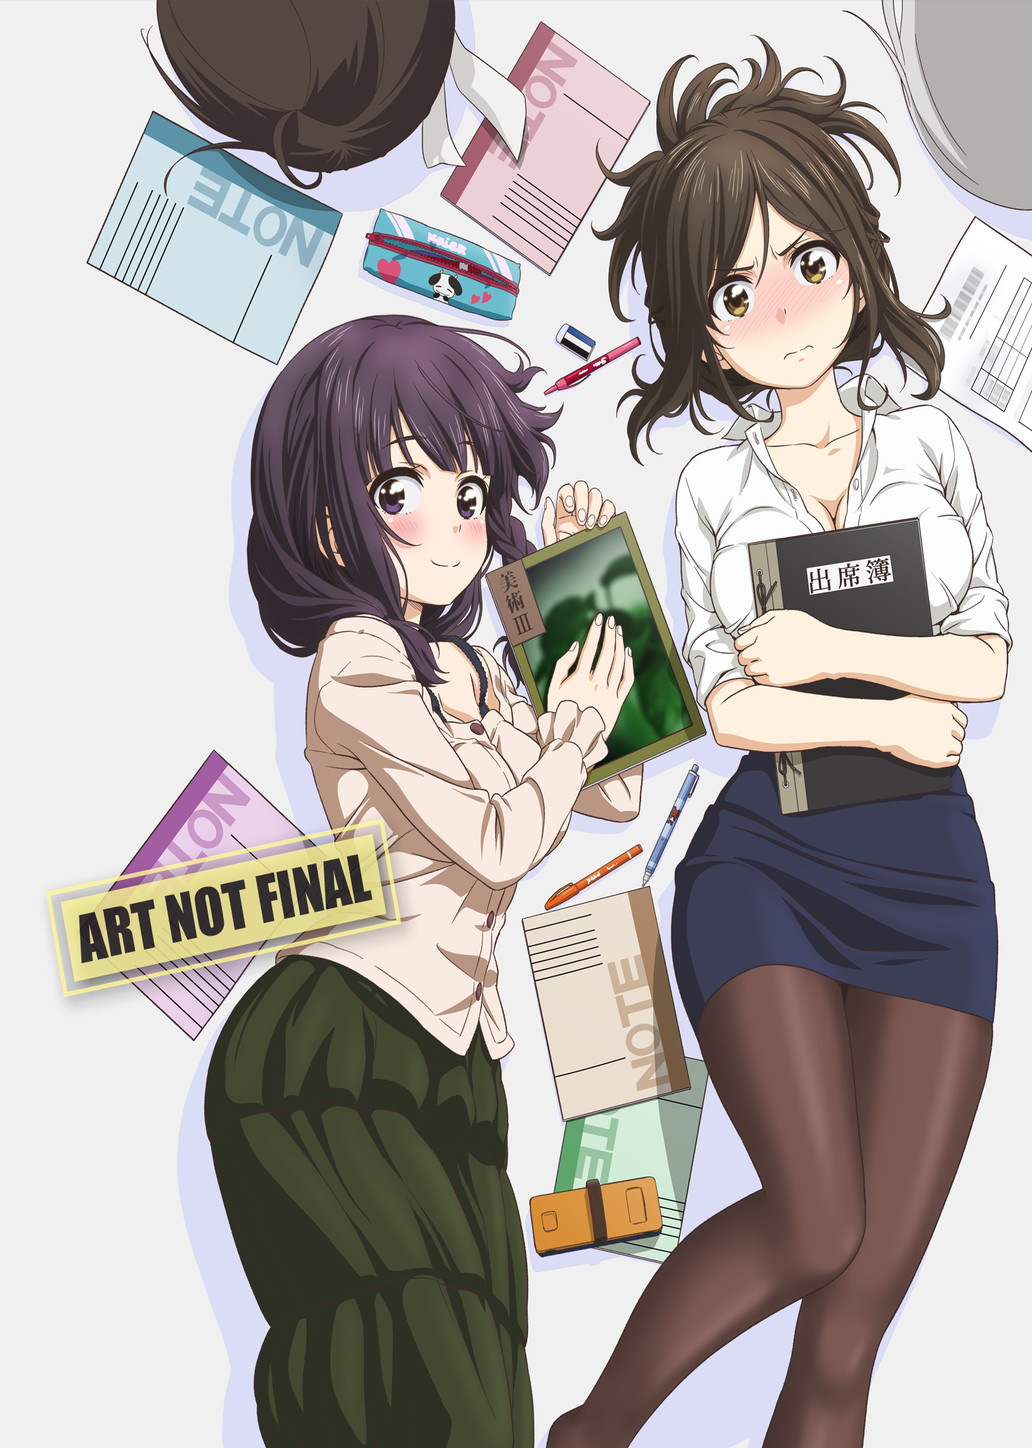 Why The Hell Are You Here Teacher? Complete Series (bluray) | Aus-Anime ...